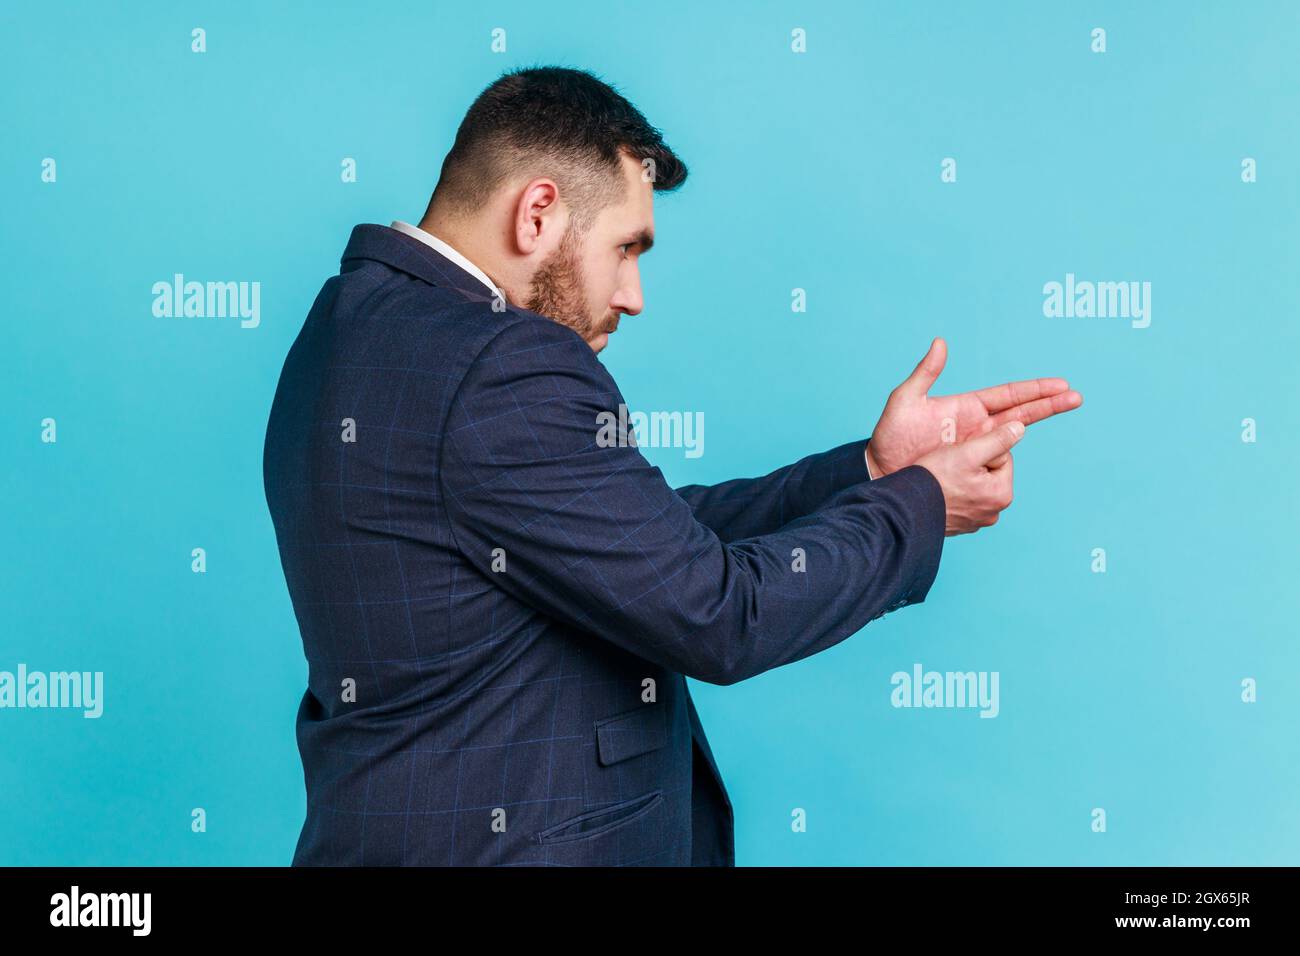 Side view of dangerous businessman wearing official style suit pointing finger gun, threatening to kill, aiming hand pistol, forward choosing direction. Indoor studio shot isolated on blue background. Stock Photo